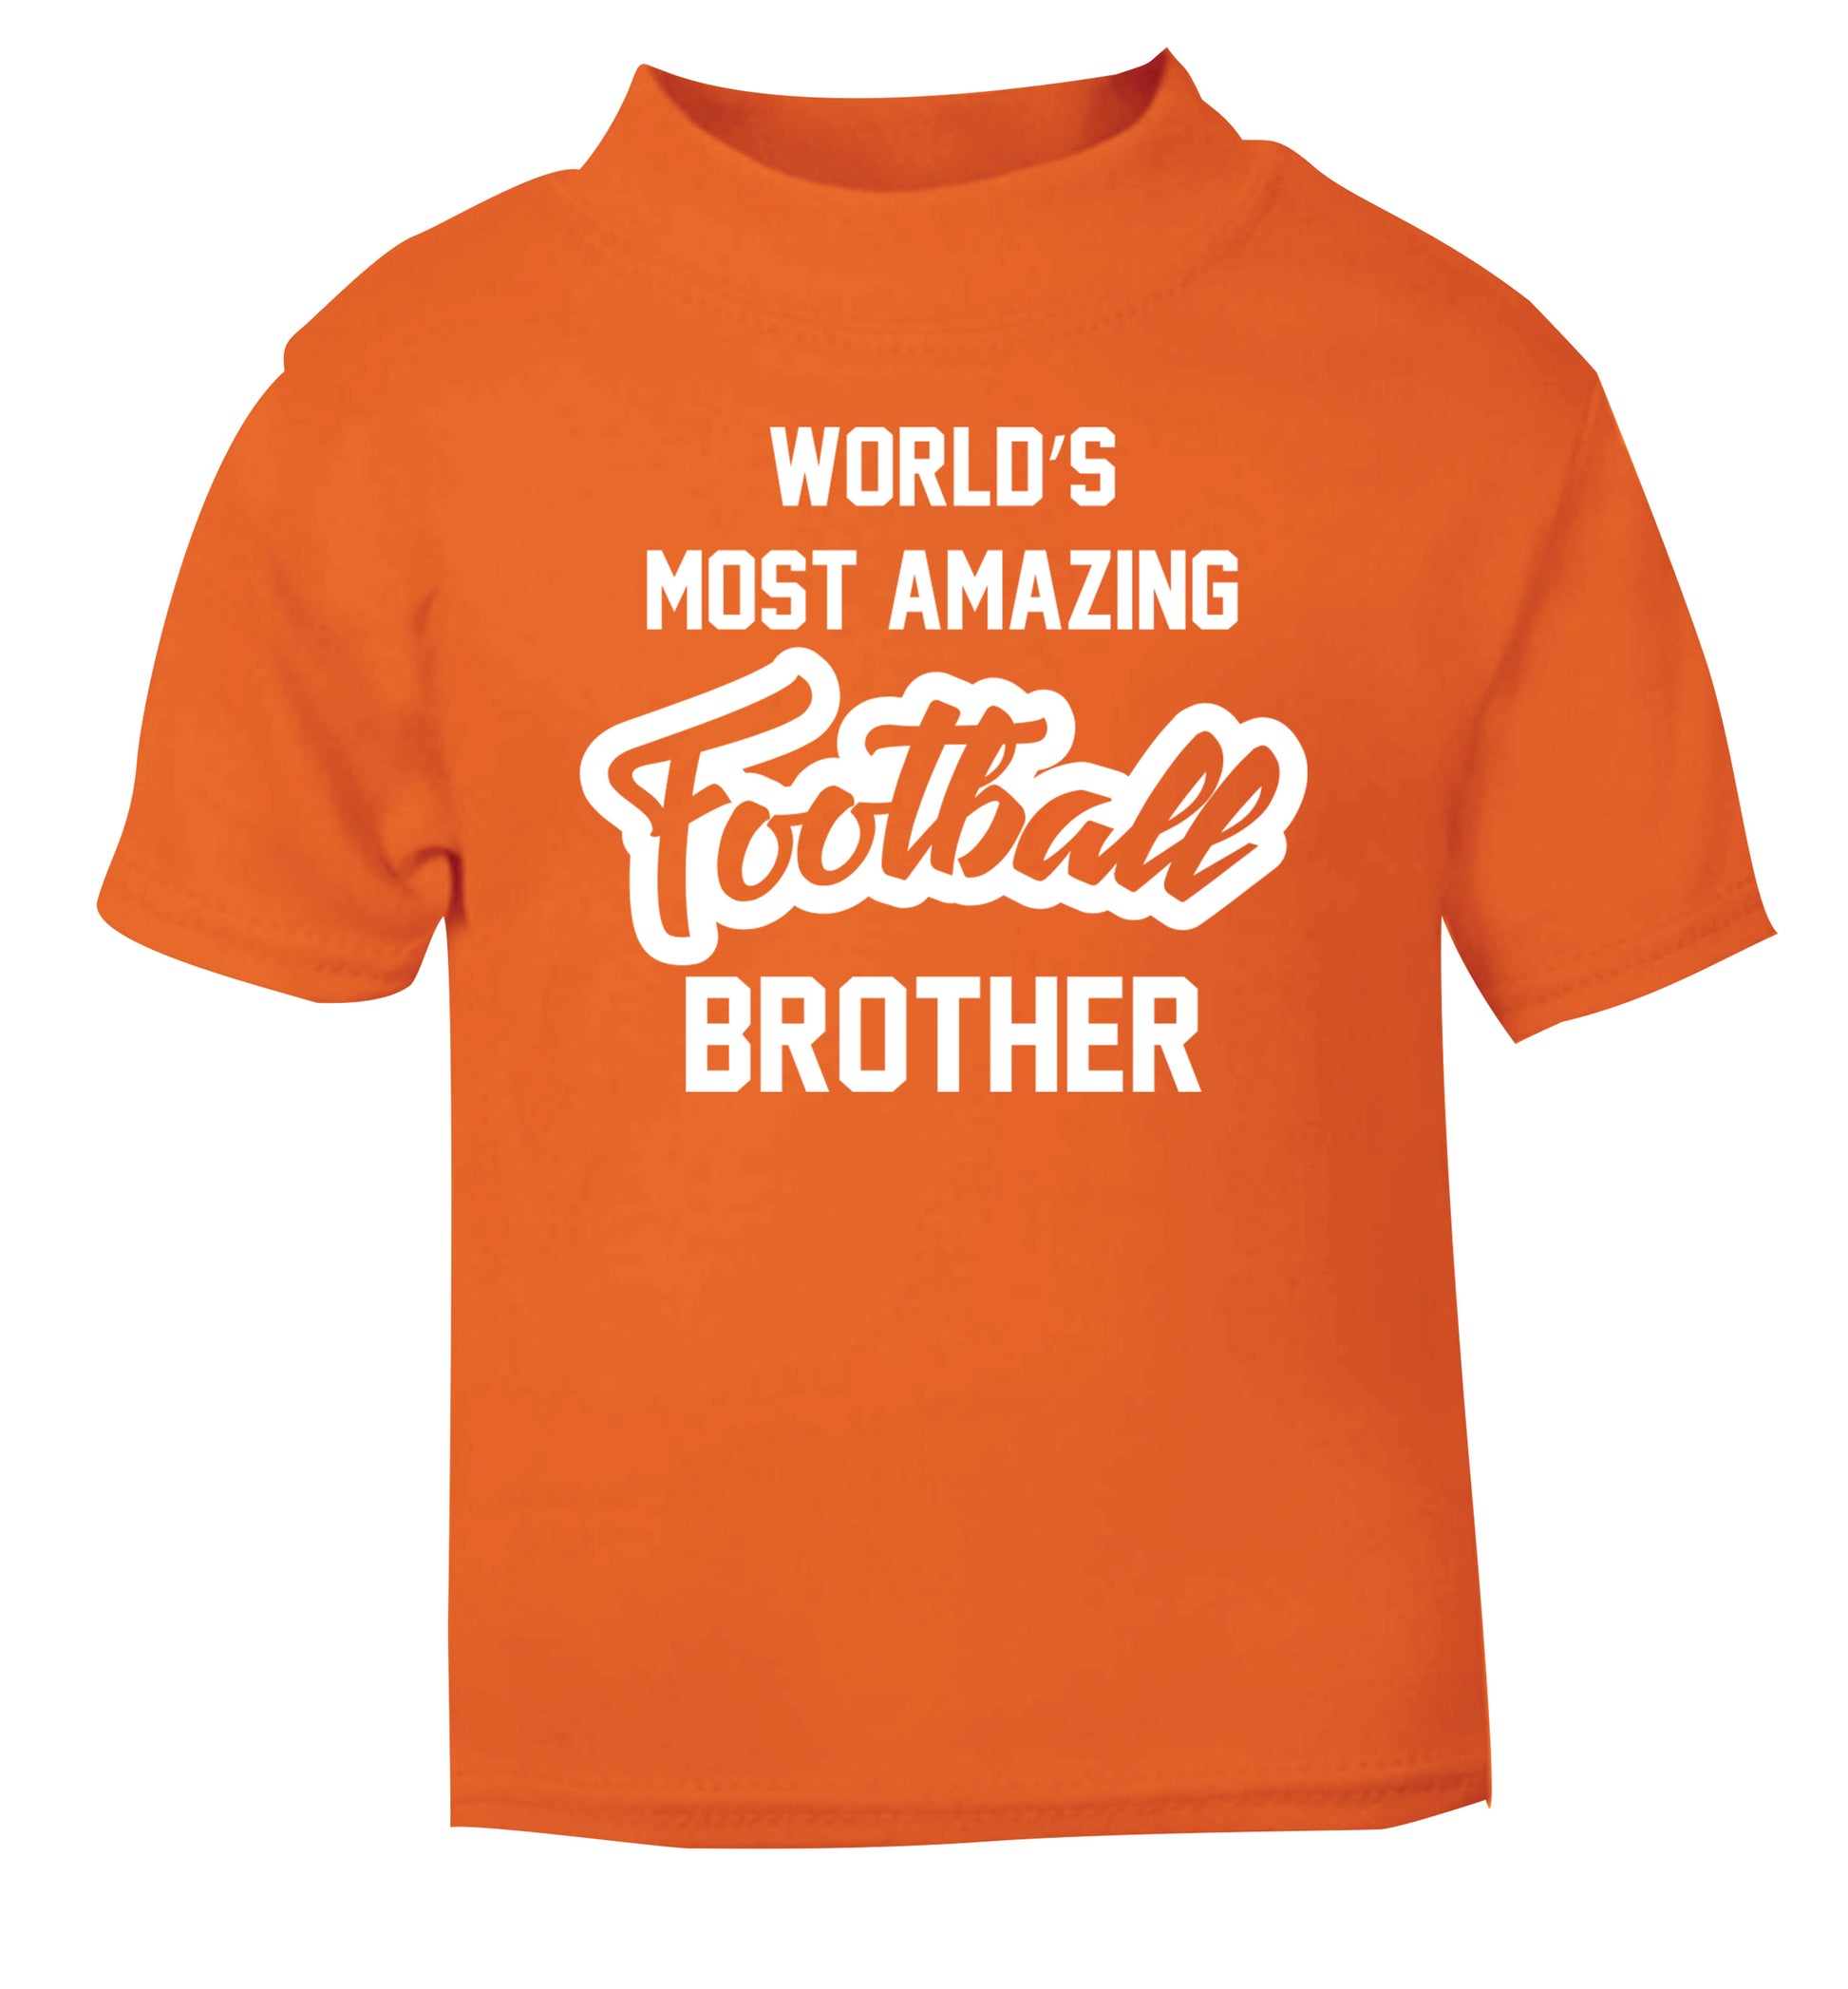 Worlds most amazing football brother orange Baby Toddler Tshirt 2 Years